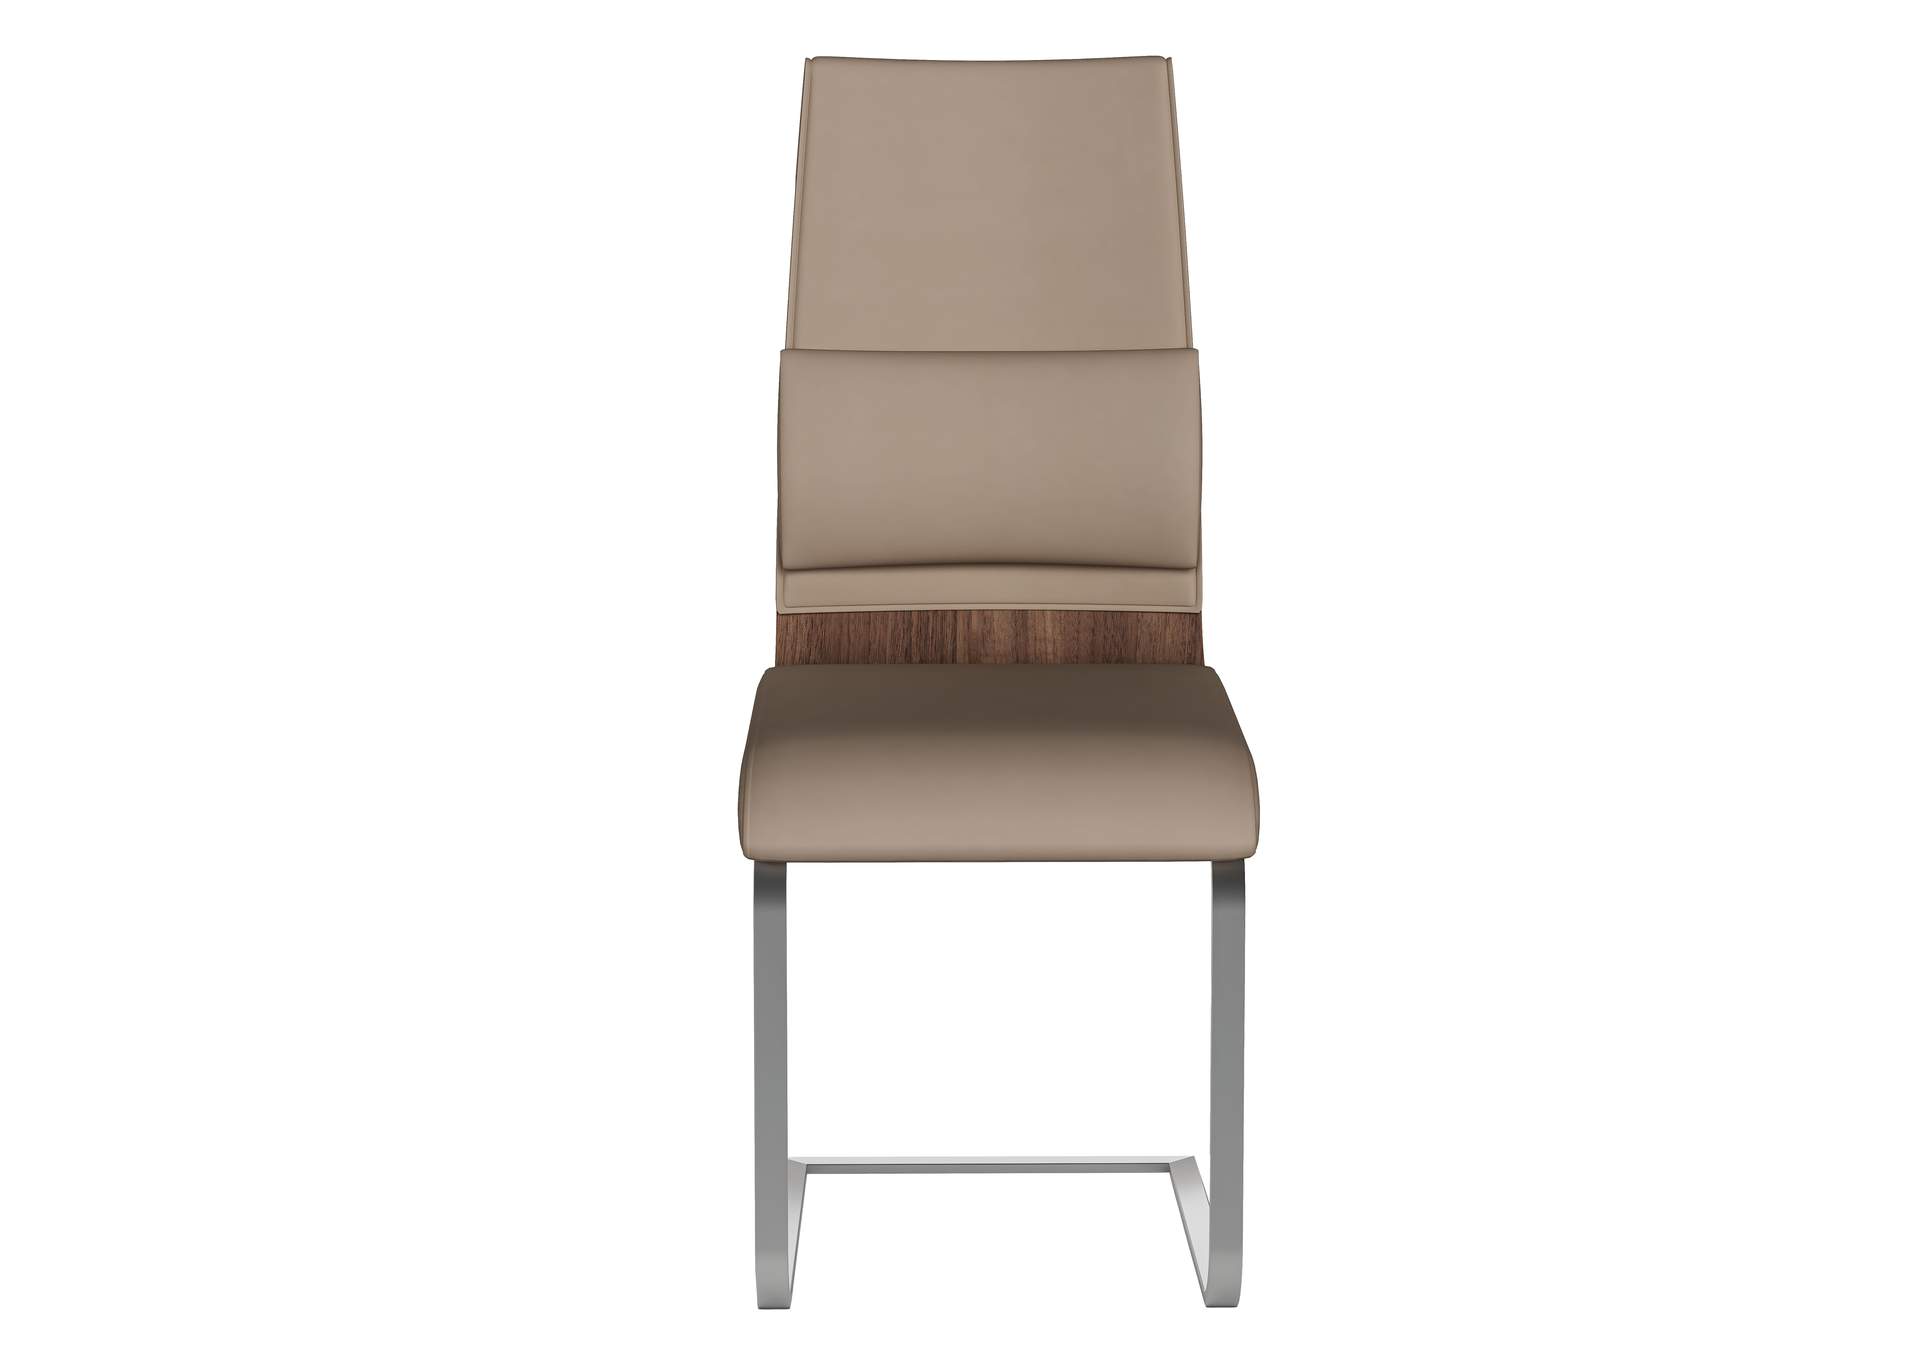 Cantilever Side Chair w/ Back Cushion,Chintaly Imports